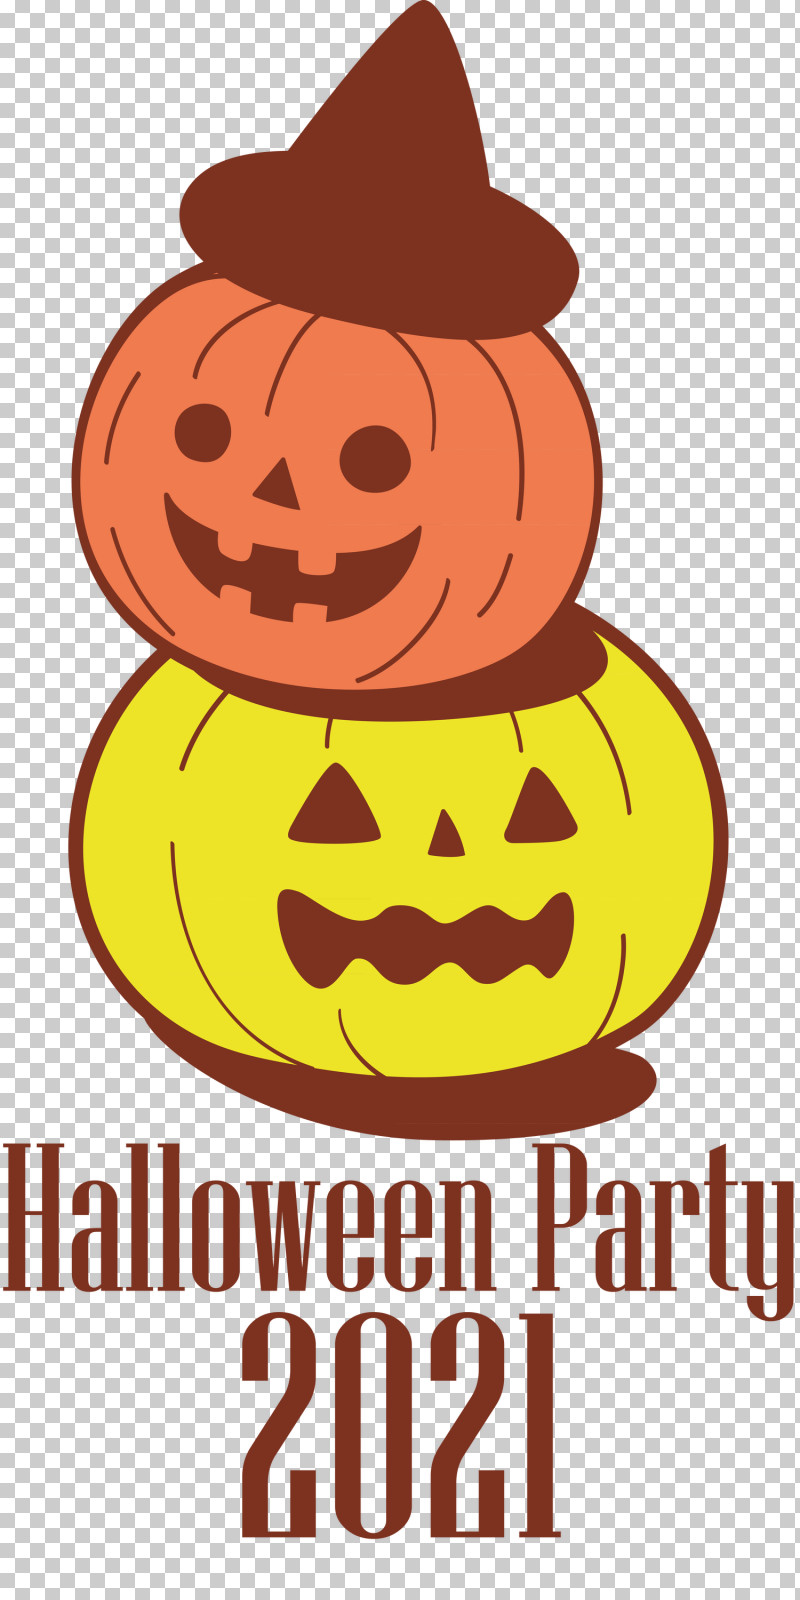 Halloween Party 2021 Halloween PNG, Clipart, Birthday, Cartoon, Cat, Drawing, Halloween Party Free PNG Download